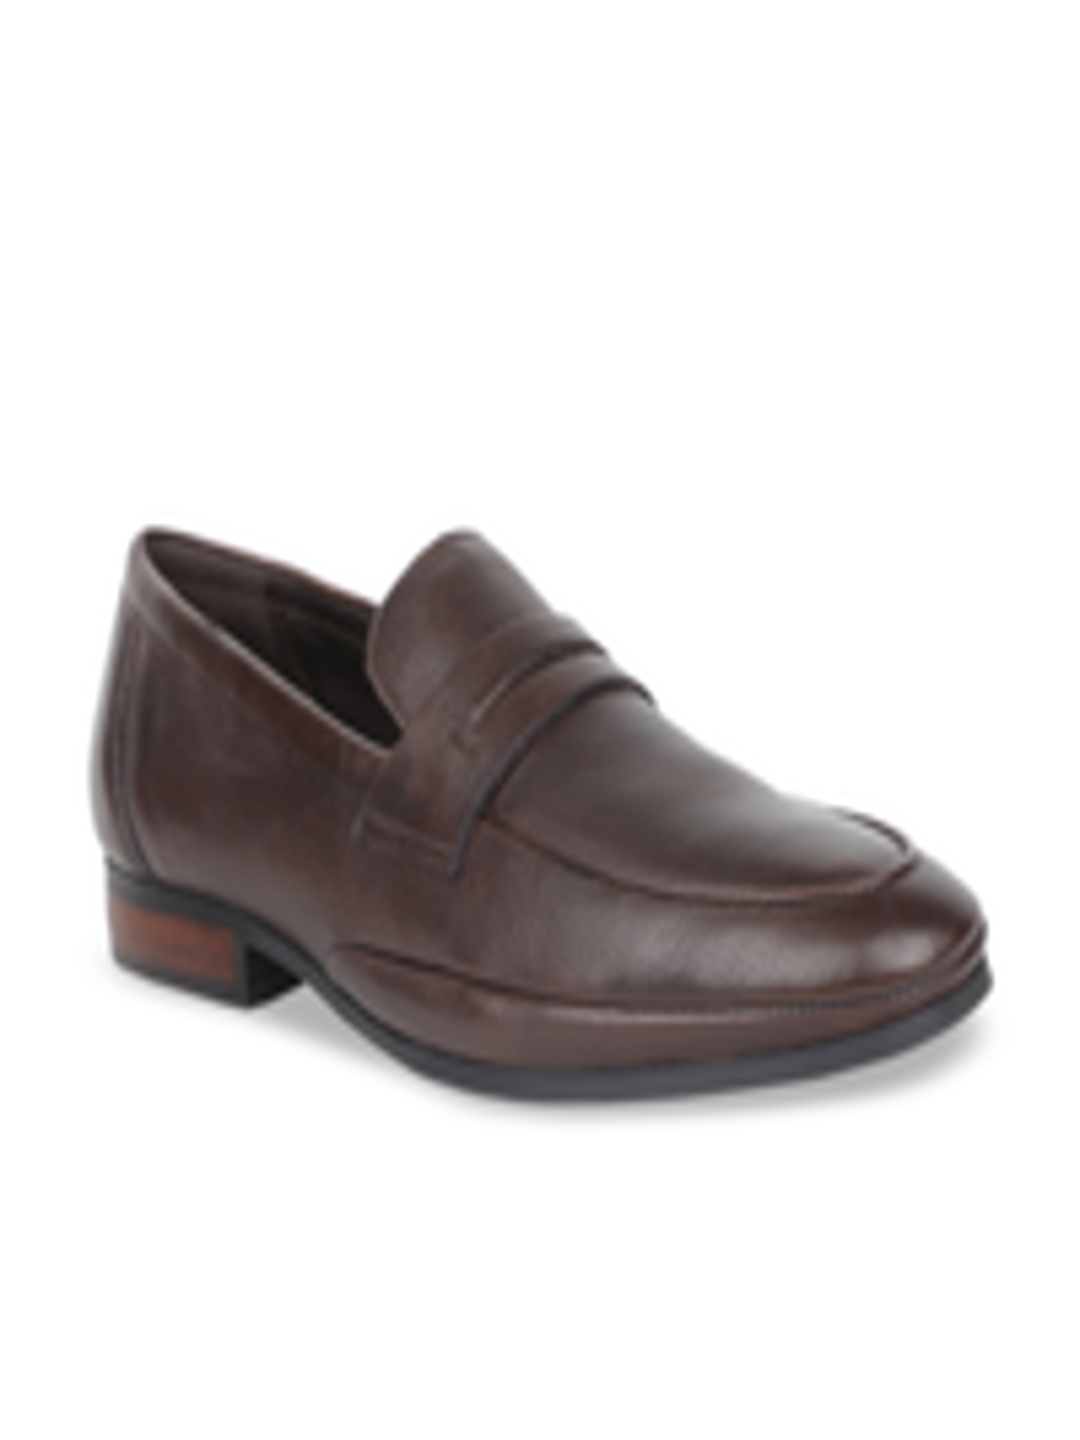 Buy Hush Puppies Men Brown Solid Leather Formal Slip On's - Formal ...